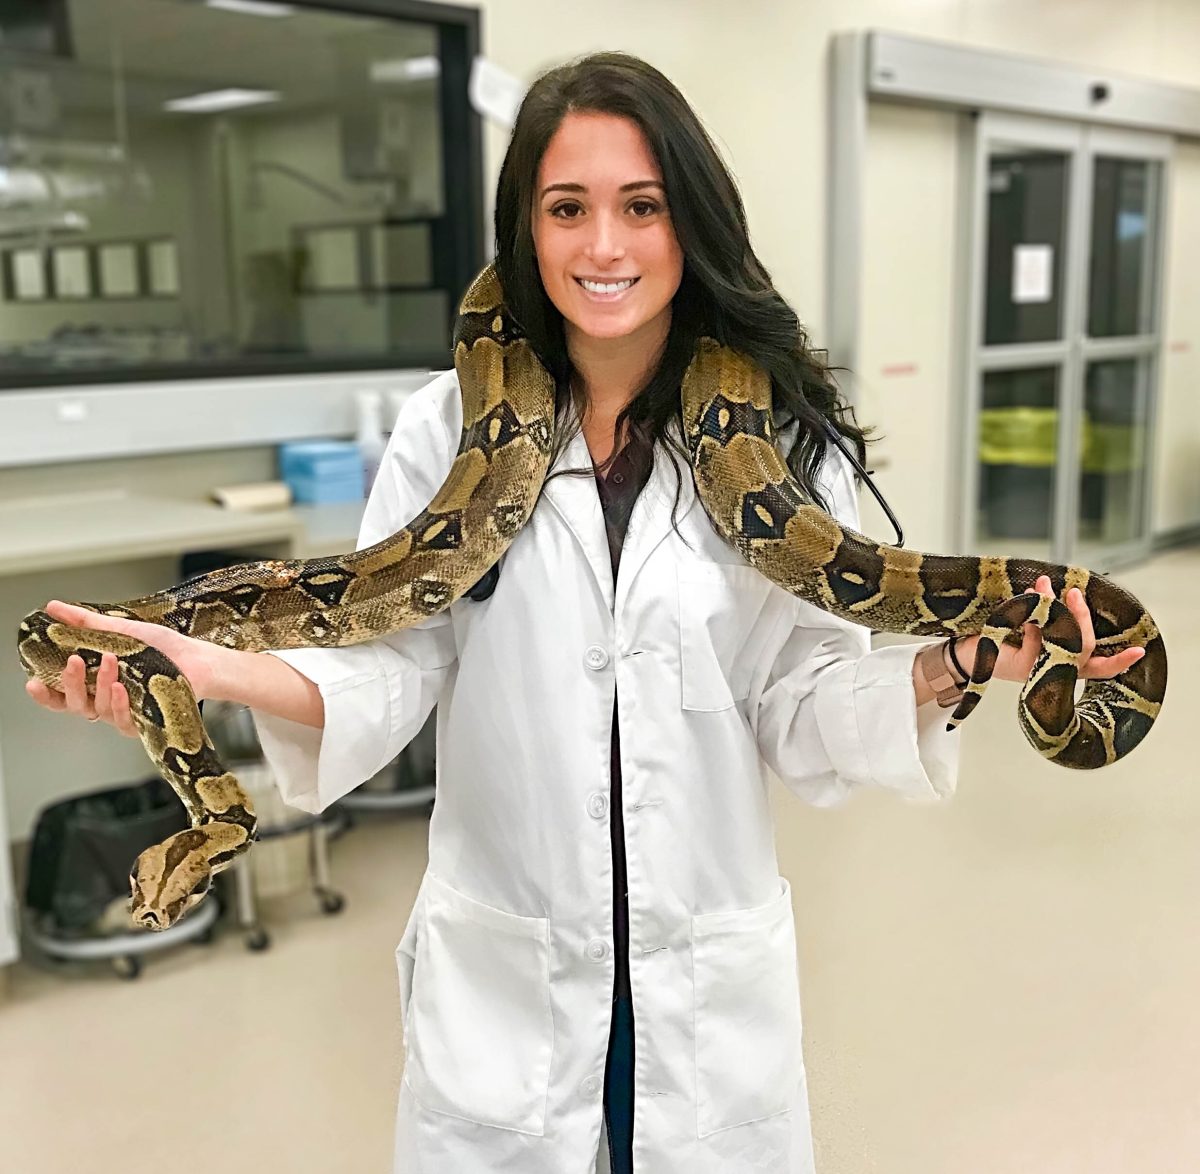 As a Texas A&M Vet student Rachel Ellerd, Class of 2021, has assisted in the care of animals ranging from kittens and birds to elephants and kangaroos.